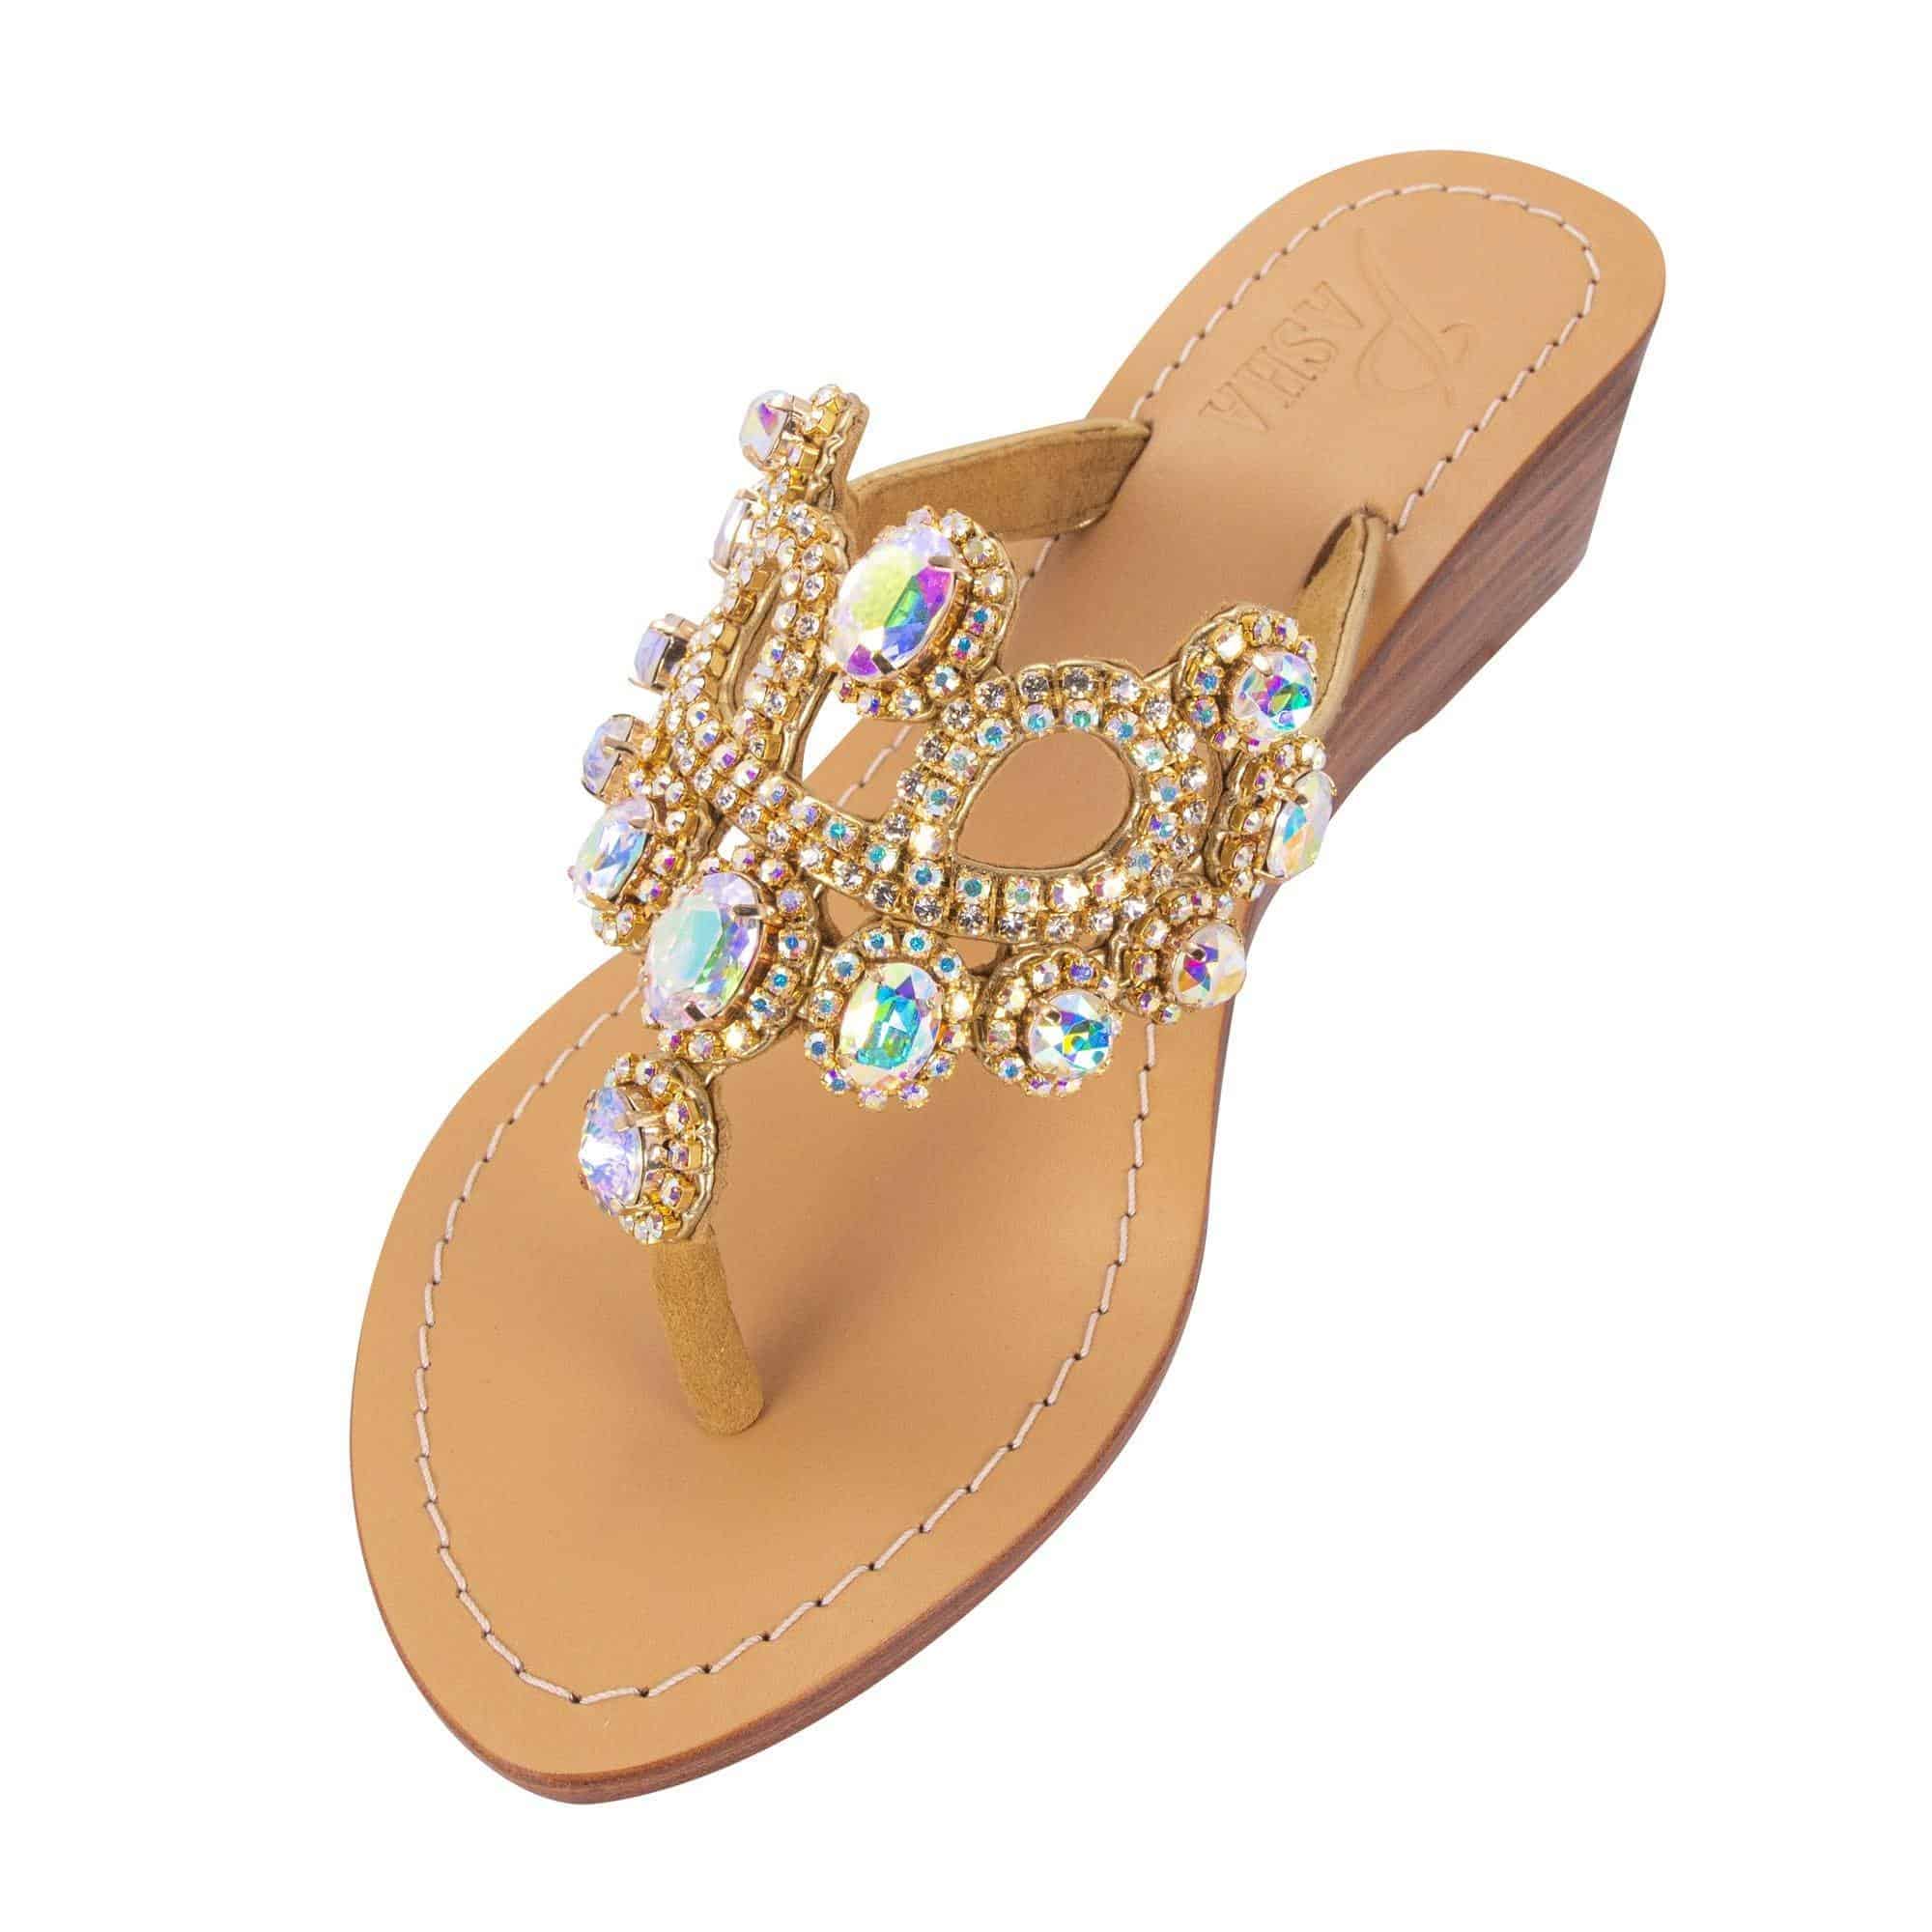 ST. VINCENT - Pasha | Handmade Leather Sandals with Czech Rhinestones - 